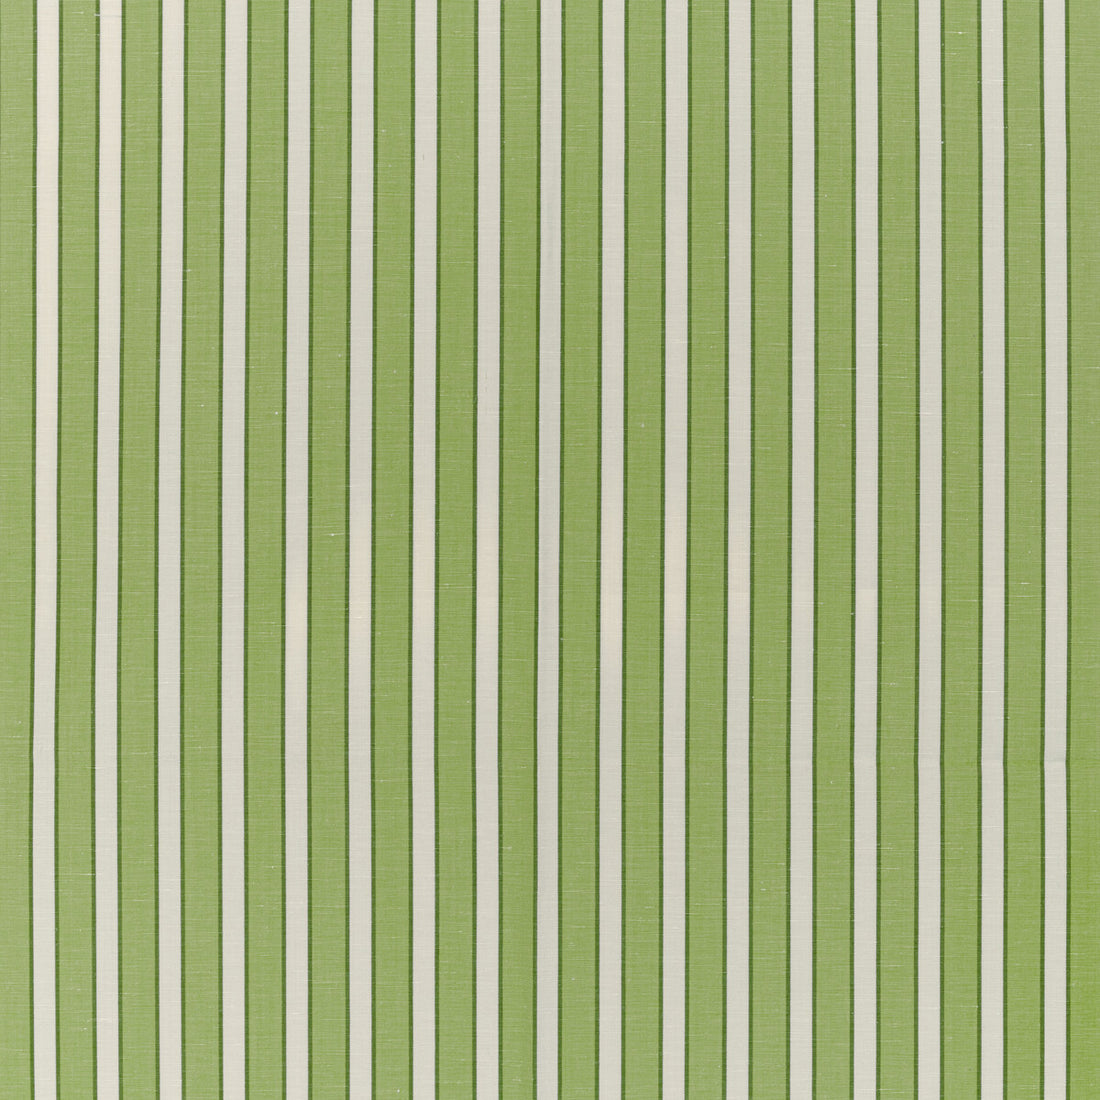 Rouen Stripe fabric in green color - pattern 8022117.33.0 - by Brunschwig &amp; Fils in the Normant Checks And Stripes II collection